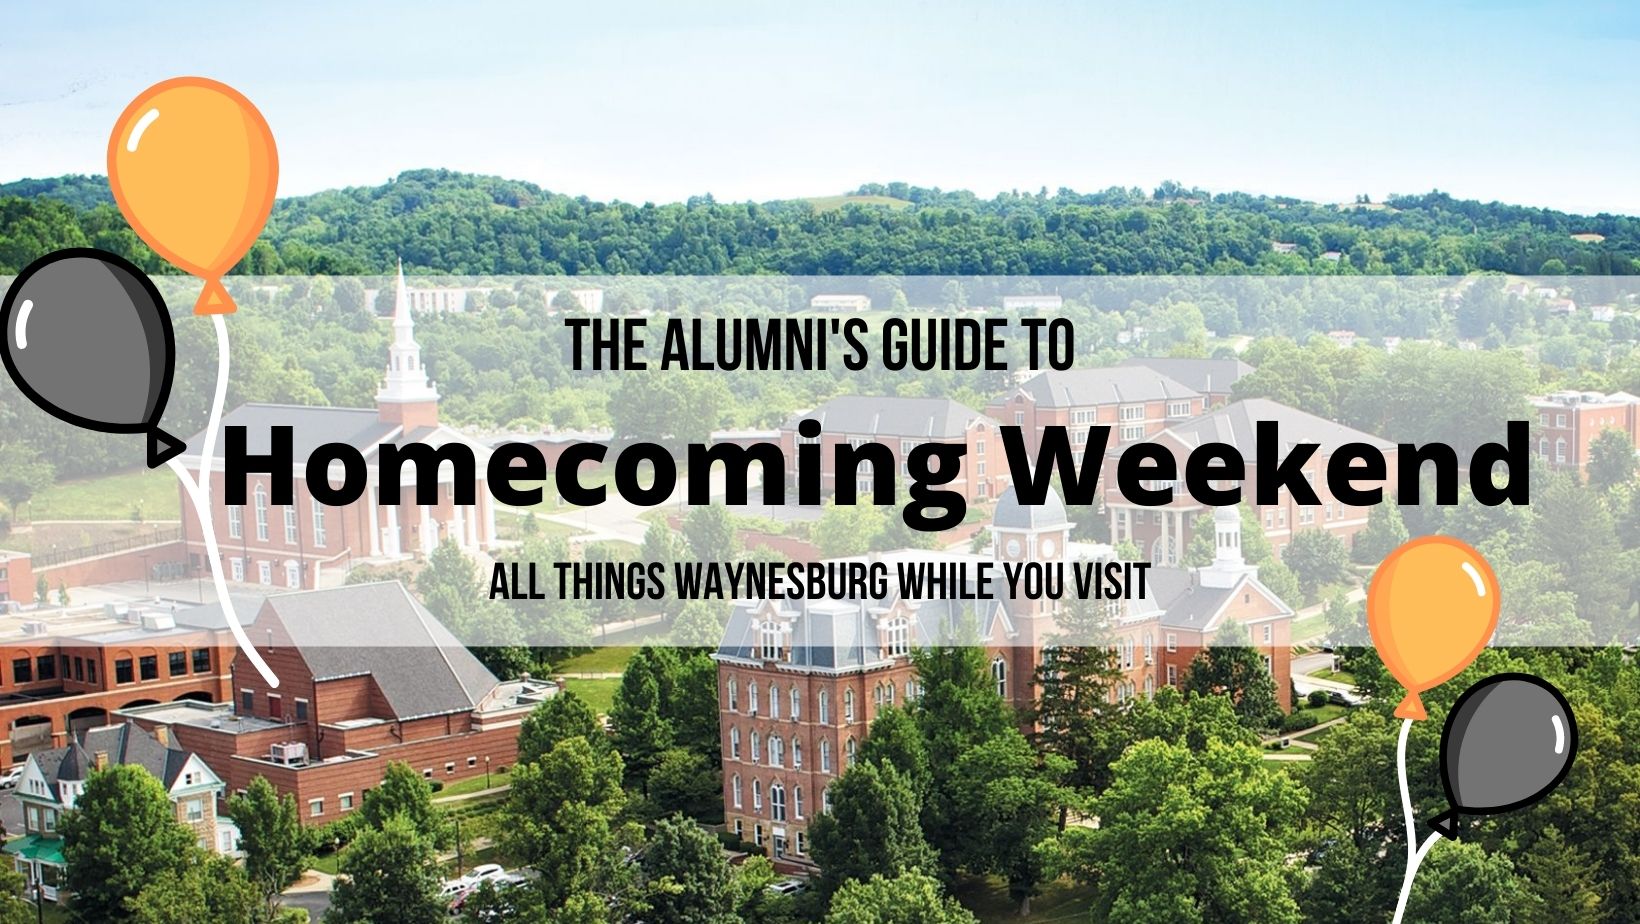 The Alumni's Guide to Homecoming Weekend: All things Waynesburg while you visit.